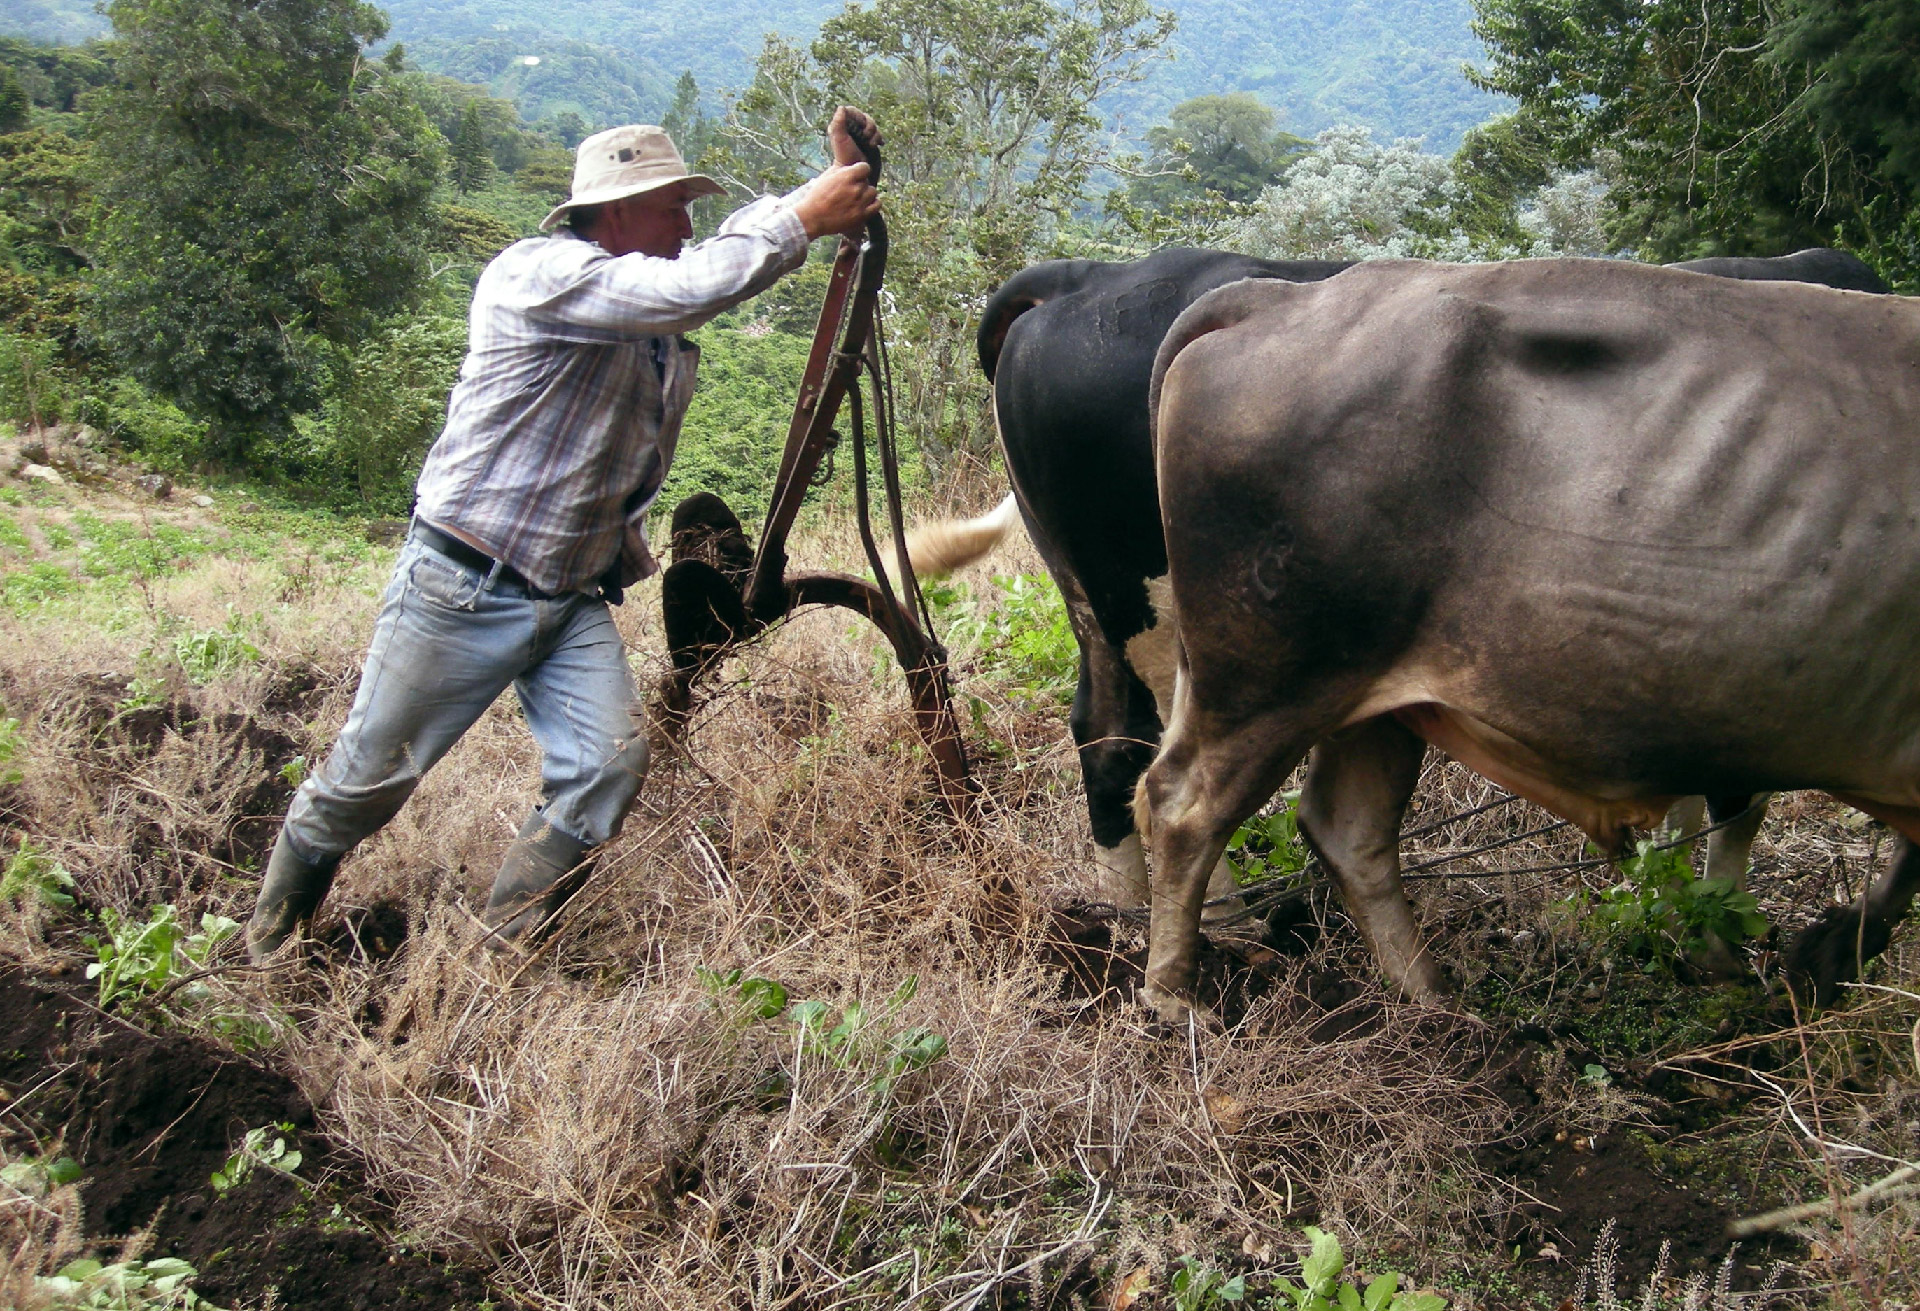 Plowing with Oxen in Panama